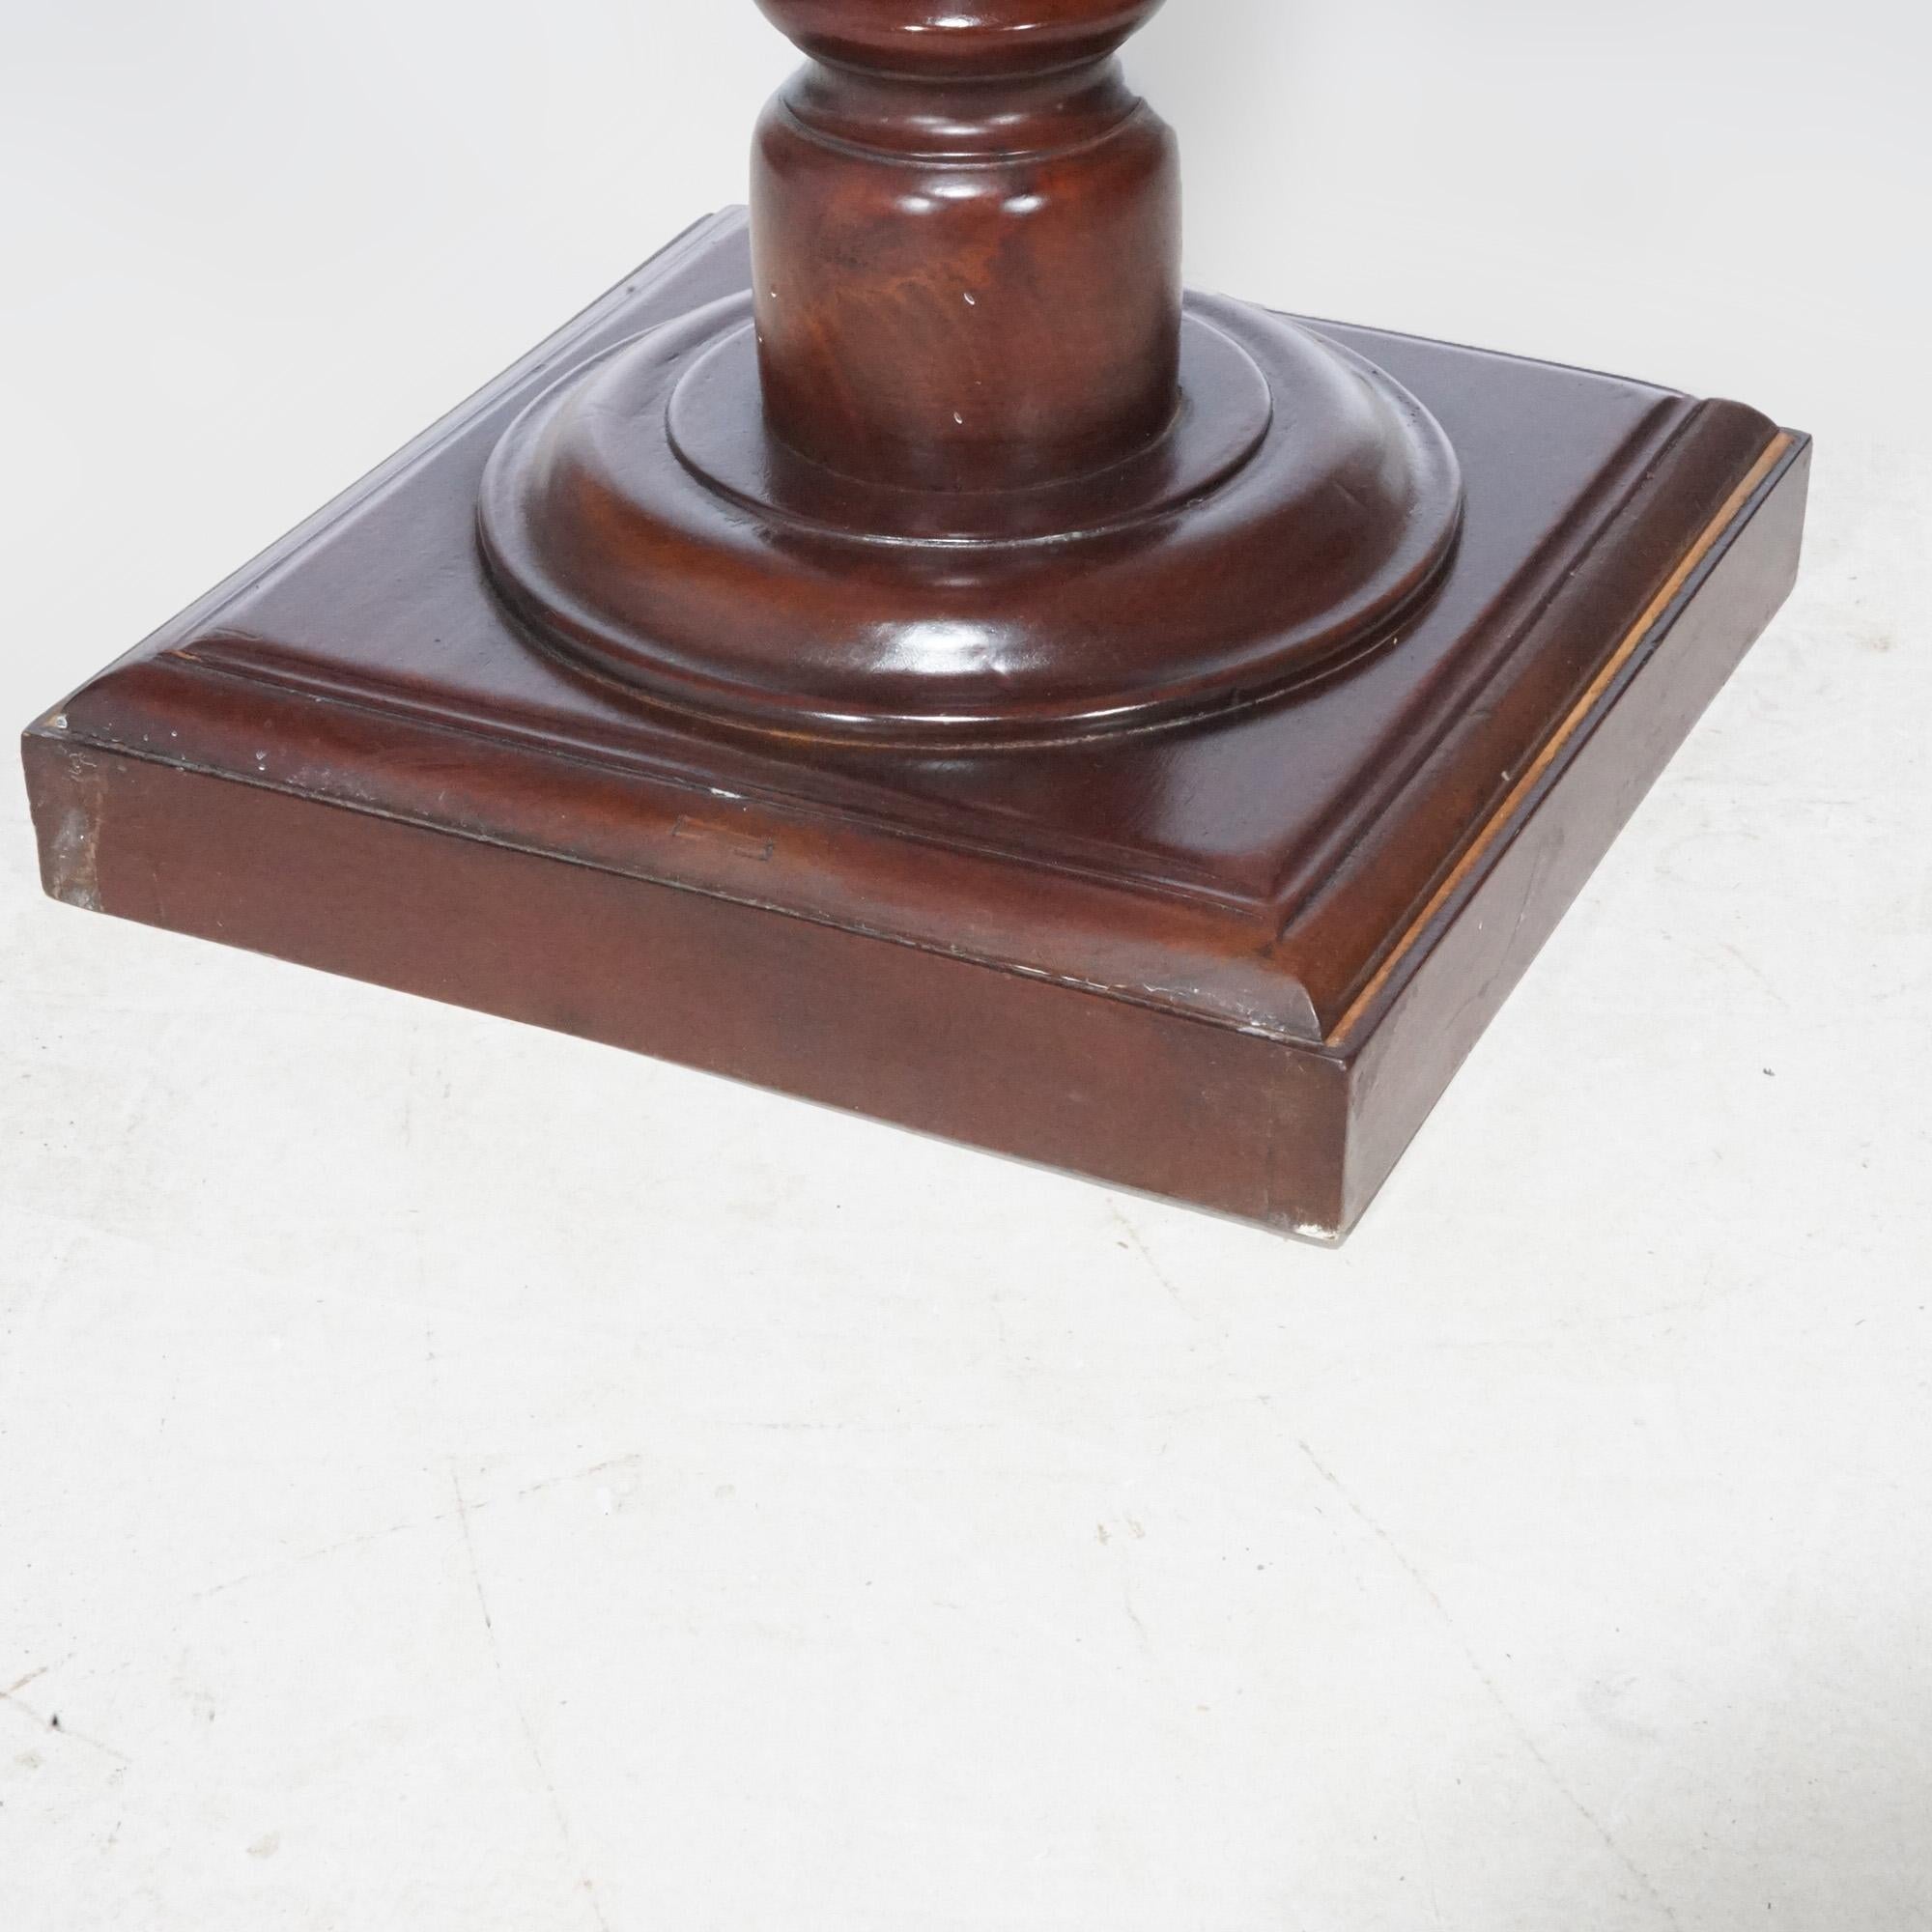 Antique Neoclassical Carved Mahogany Sculpture Display Pedestal, circa 1900 For Sale 7